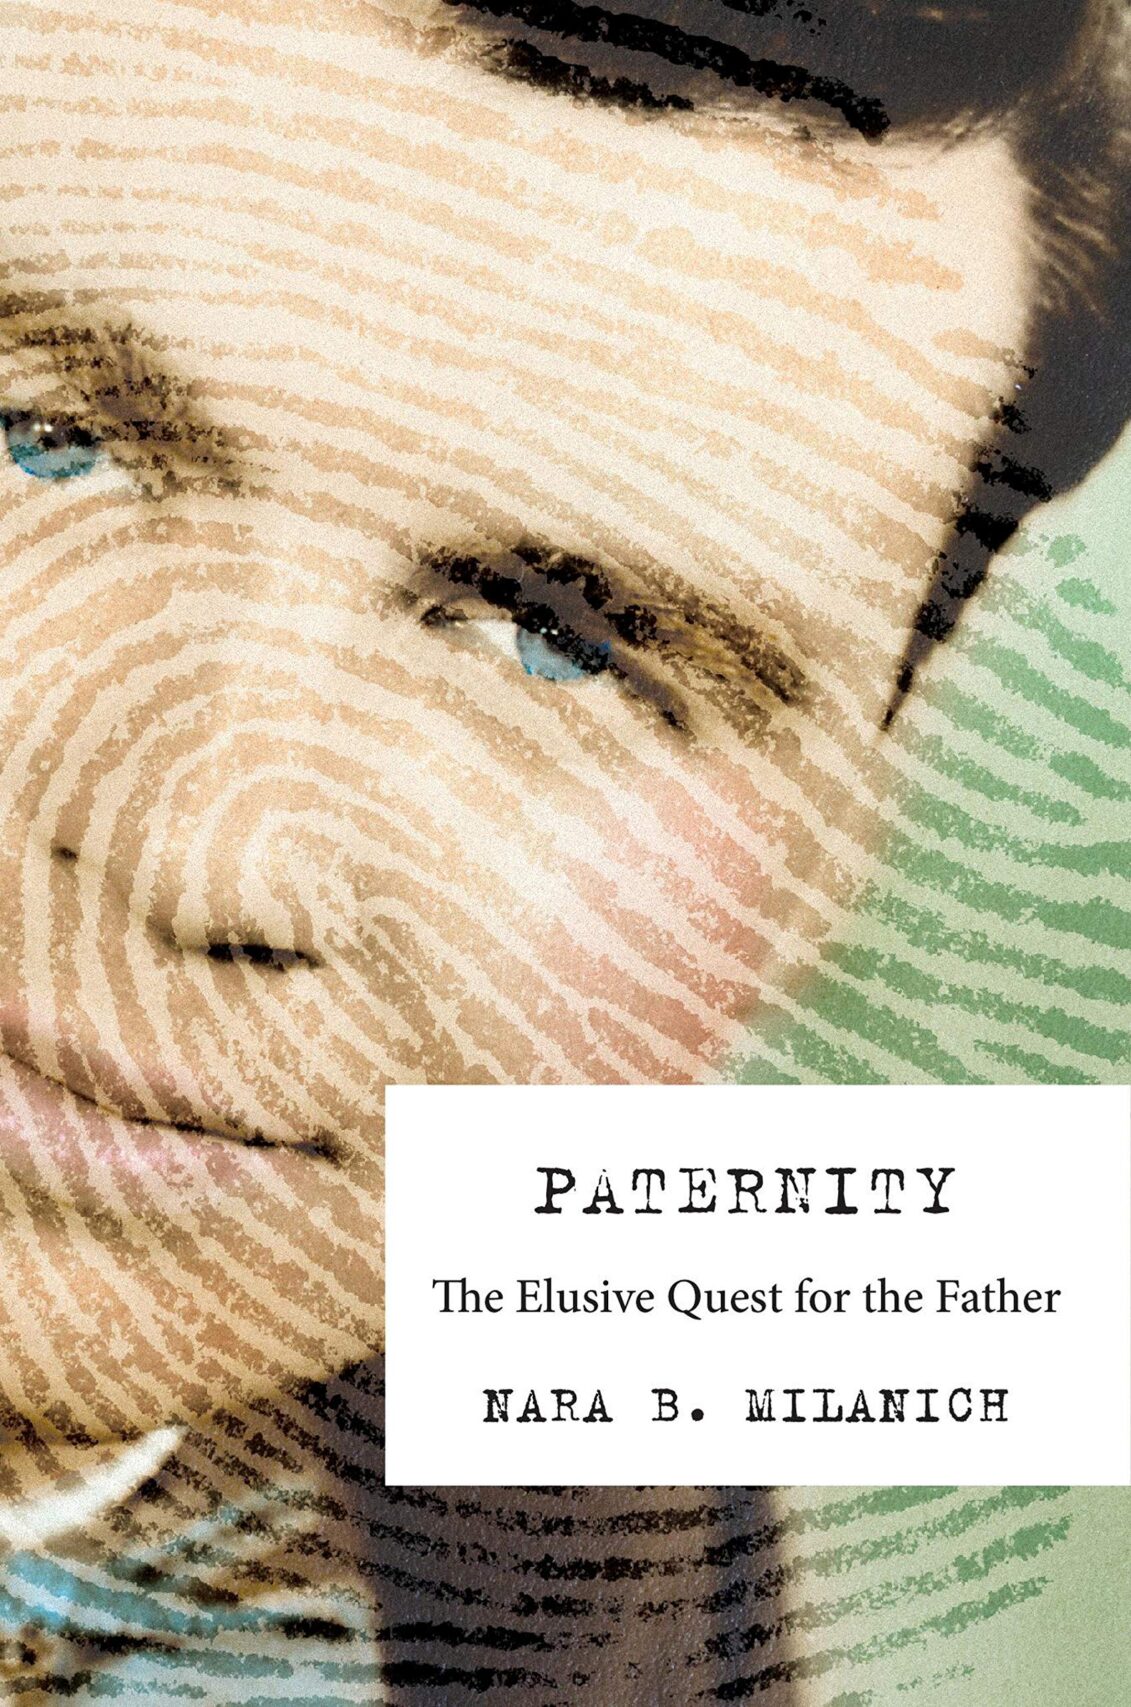 Paternity: The Elusive Quest for the Father by Nara Milanich